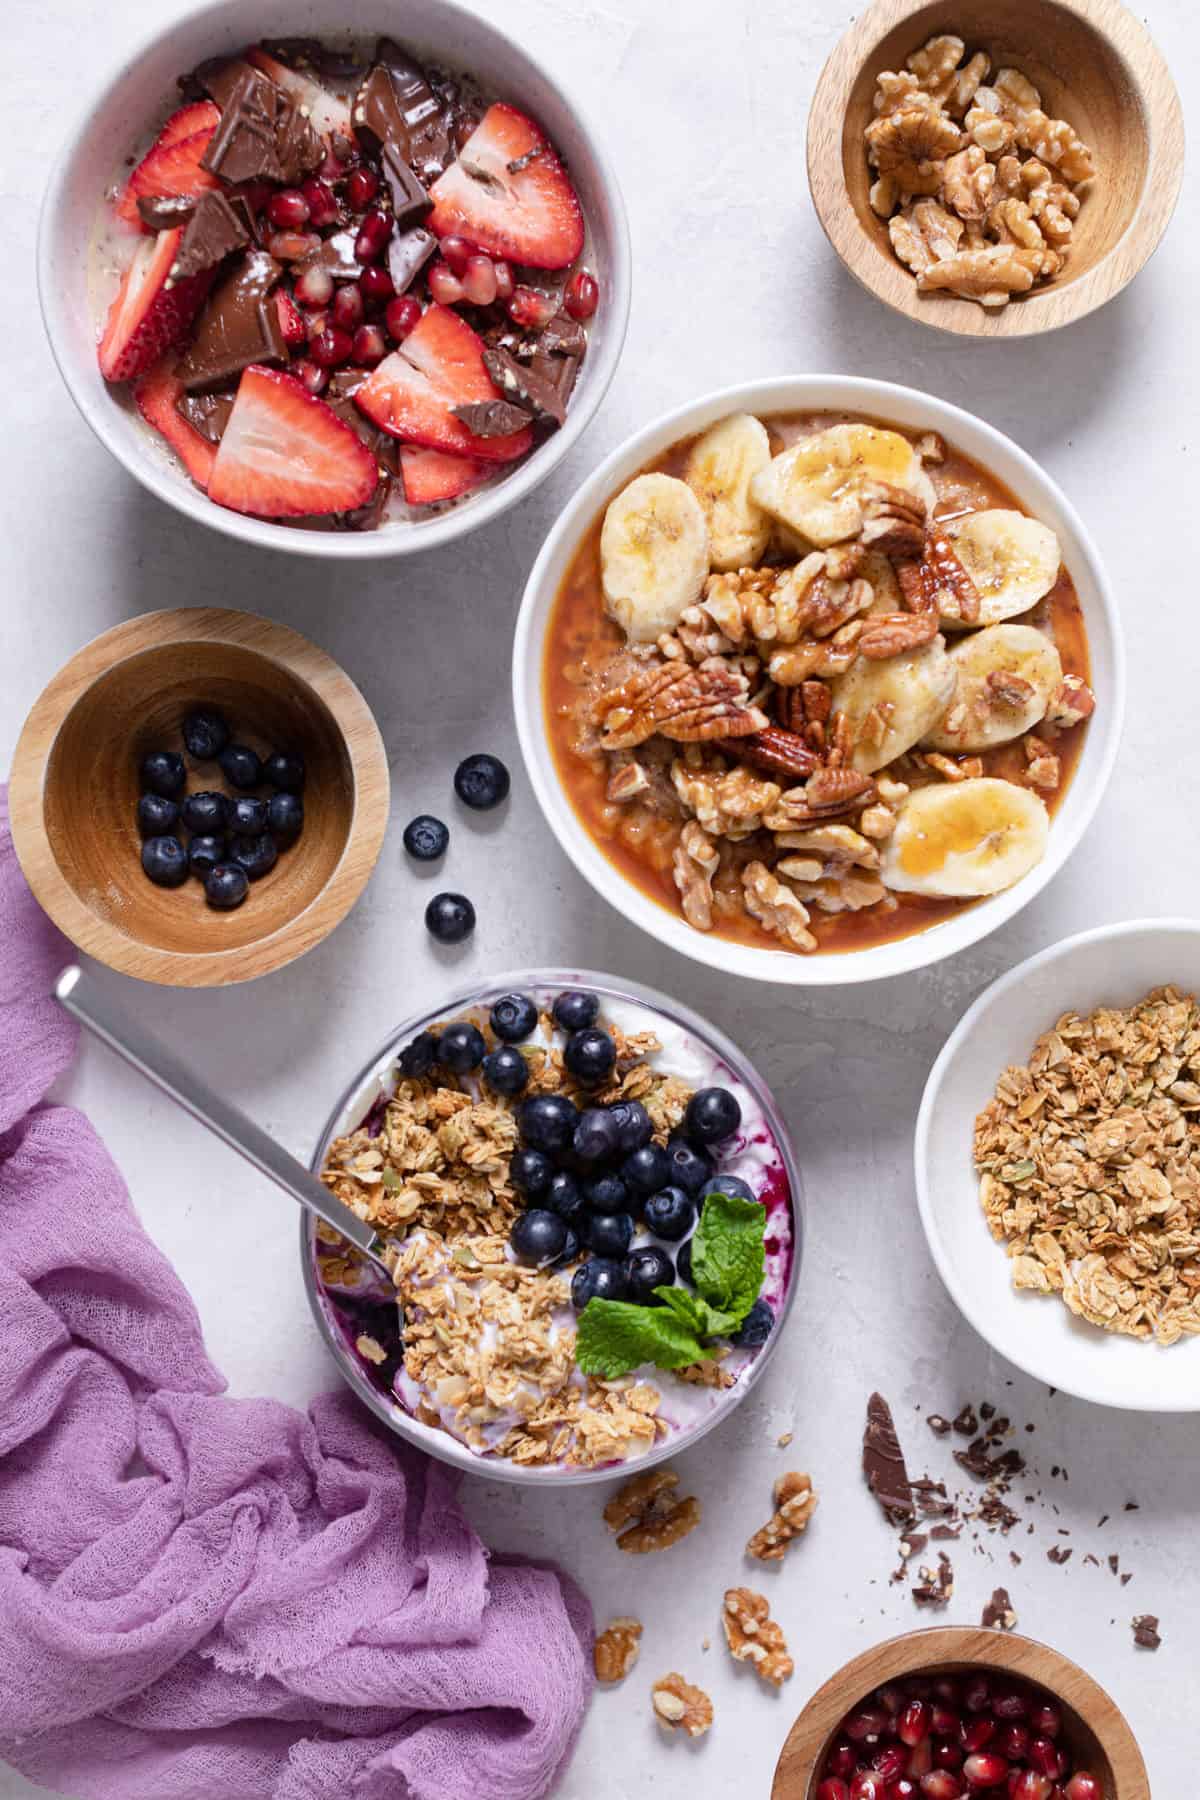 How to Build the Perfect Breakfast Bowl